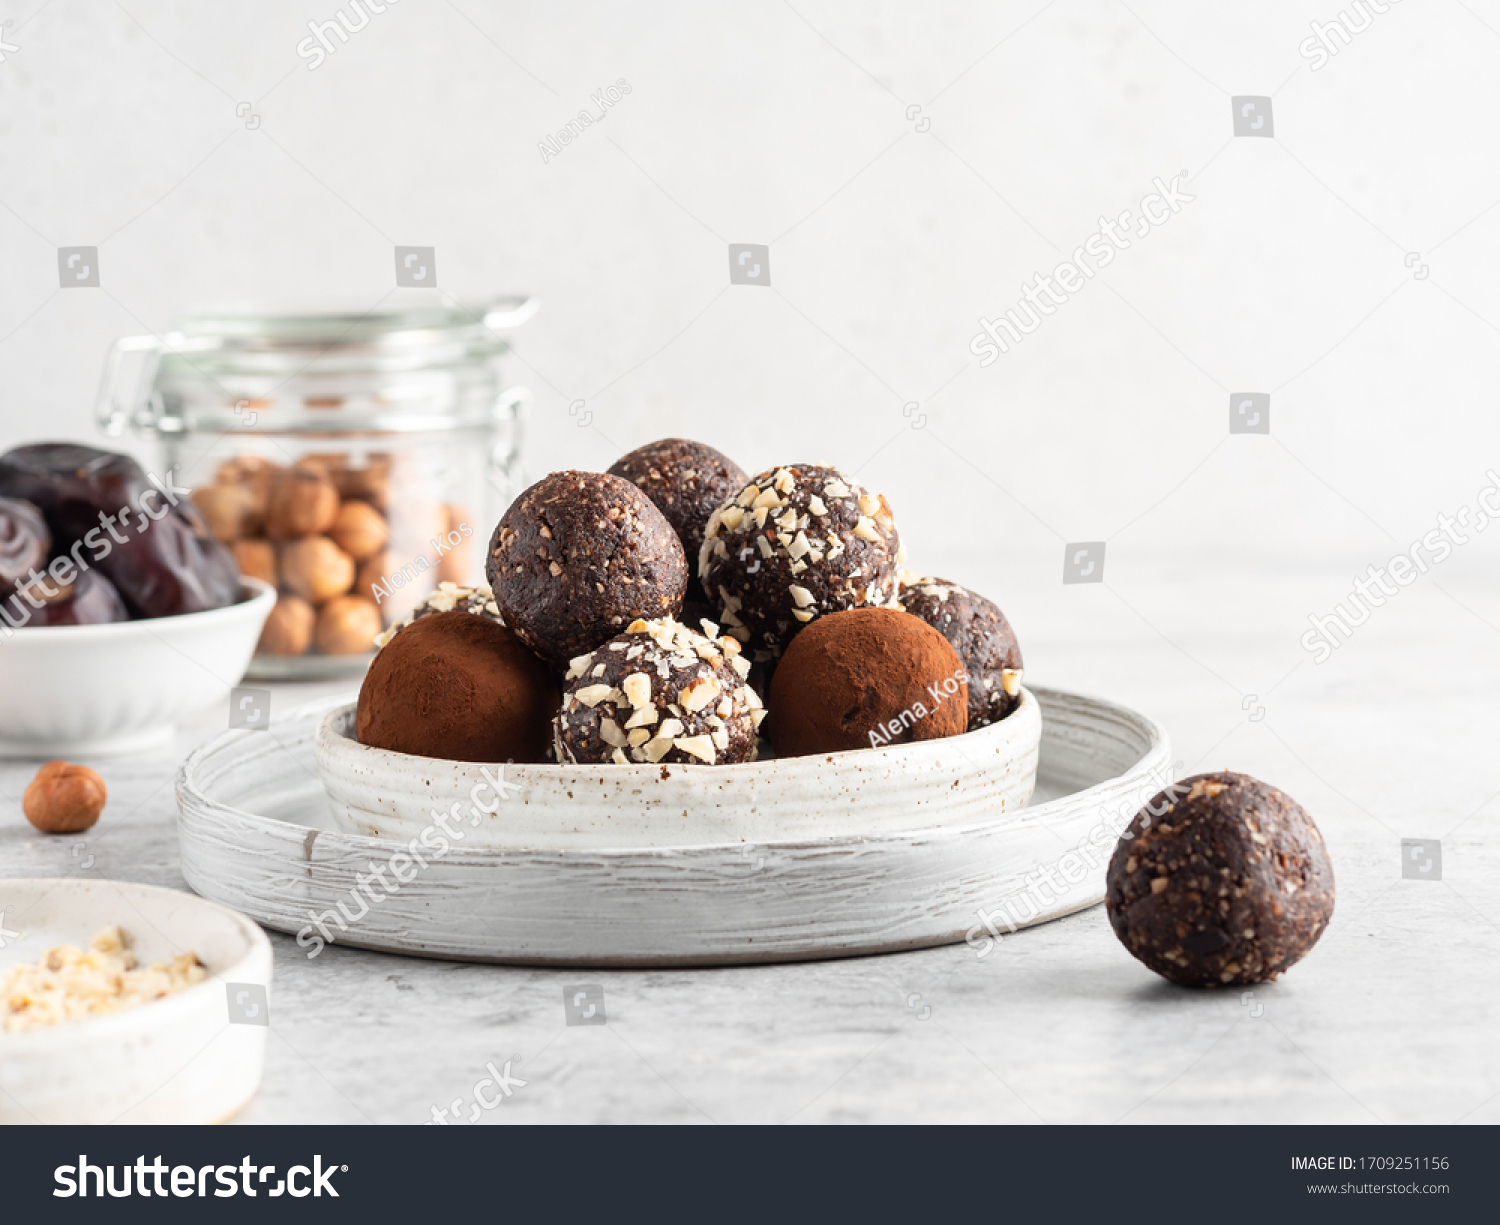 Energy balls. Healthy raw dessert (bliss balls), vegetarian truffles, sugar free candies made of dates, hazelnuts, cocoa powder. Step by step cooking. White wooden background.  #1709251156